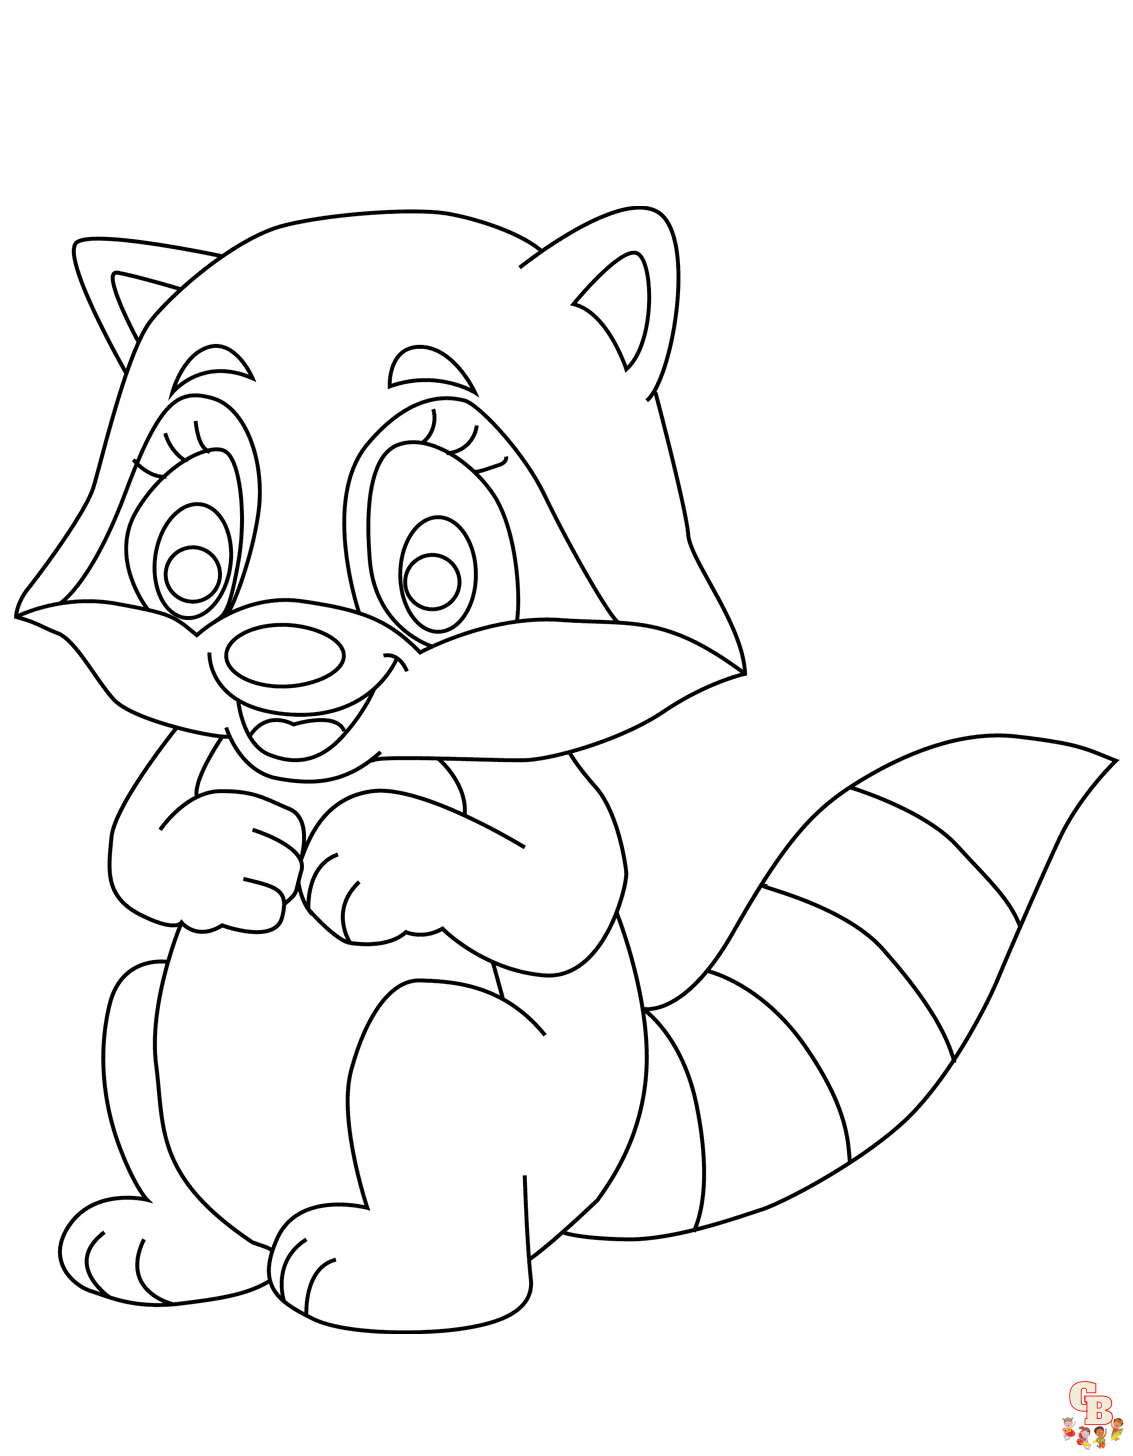 Cute raccoon coloring pages